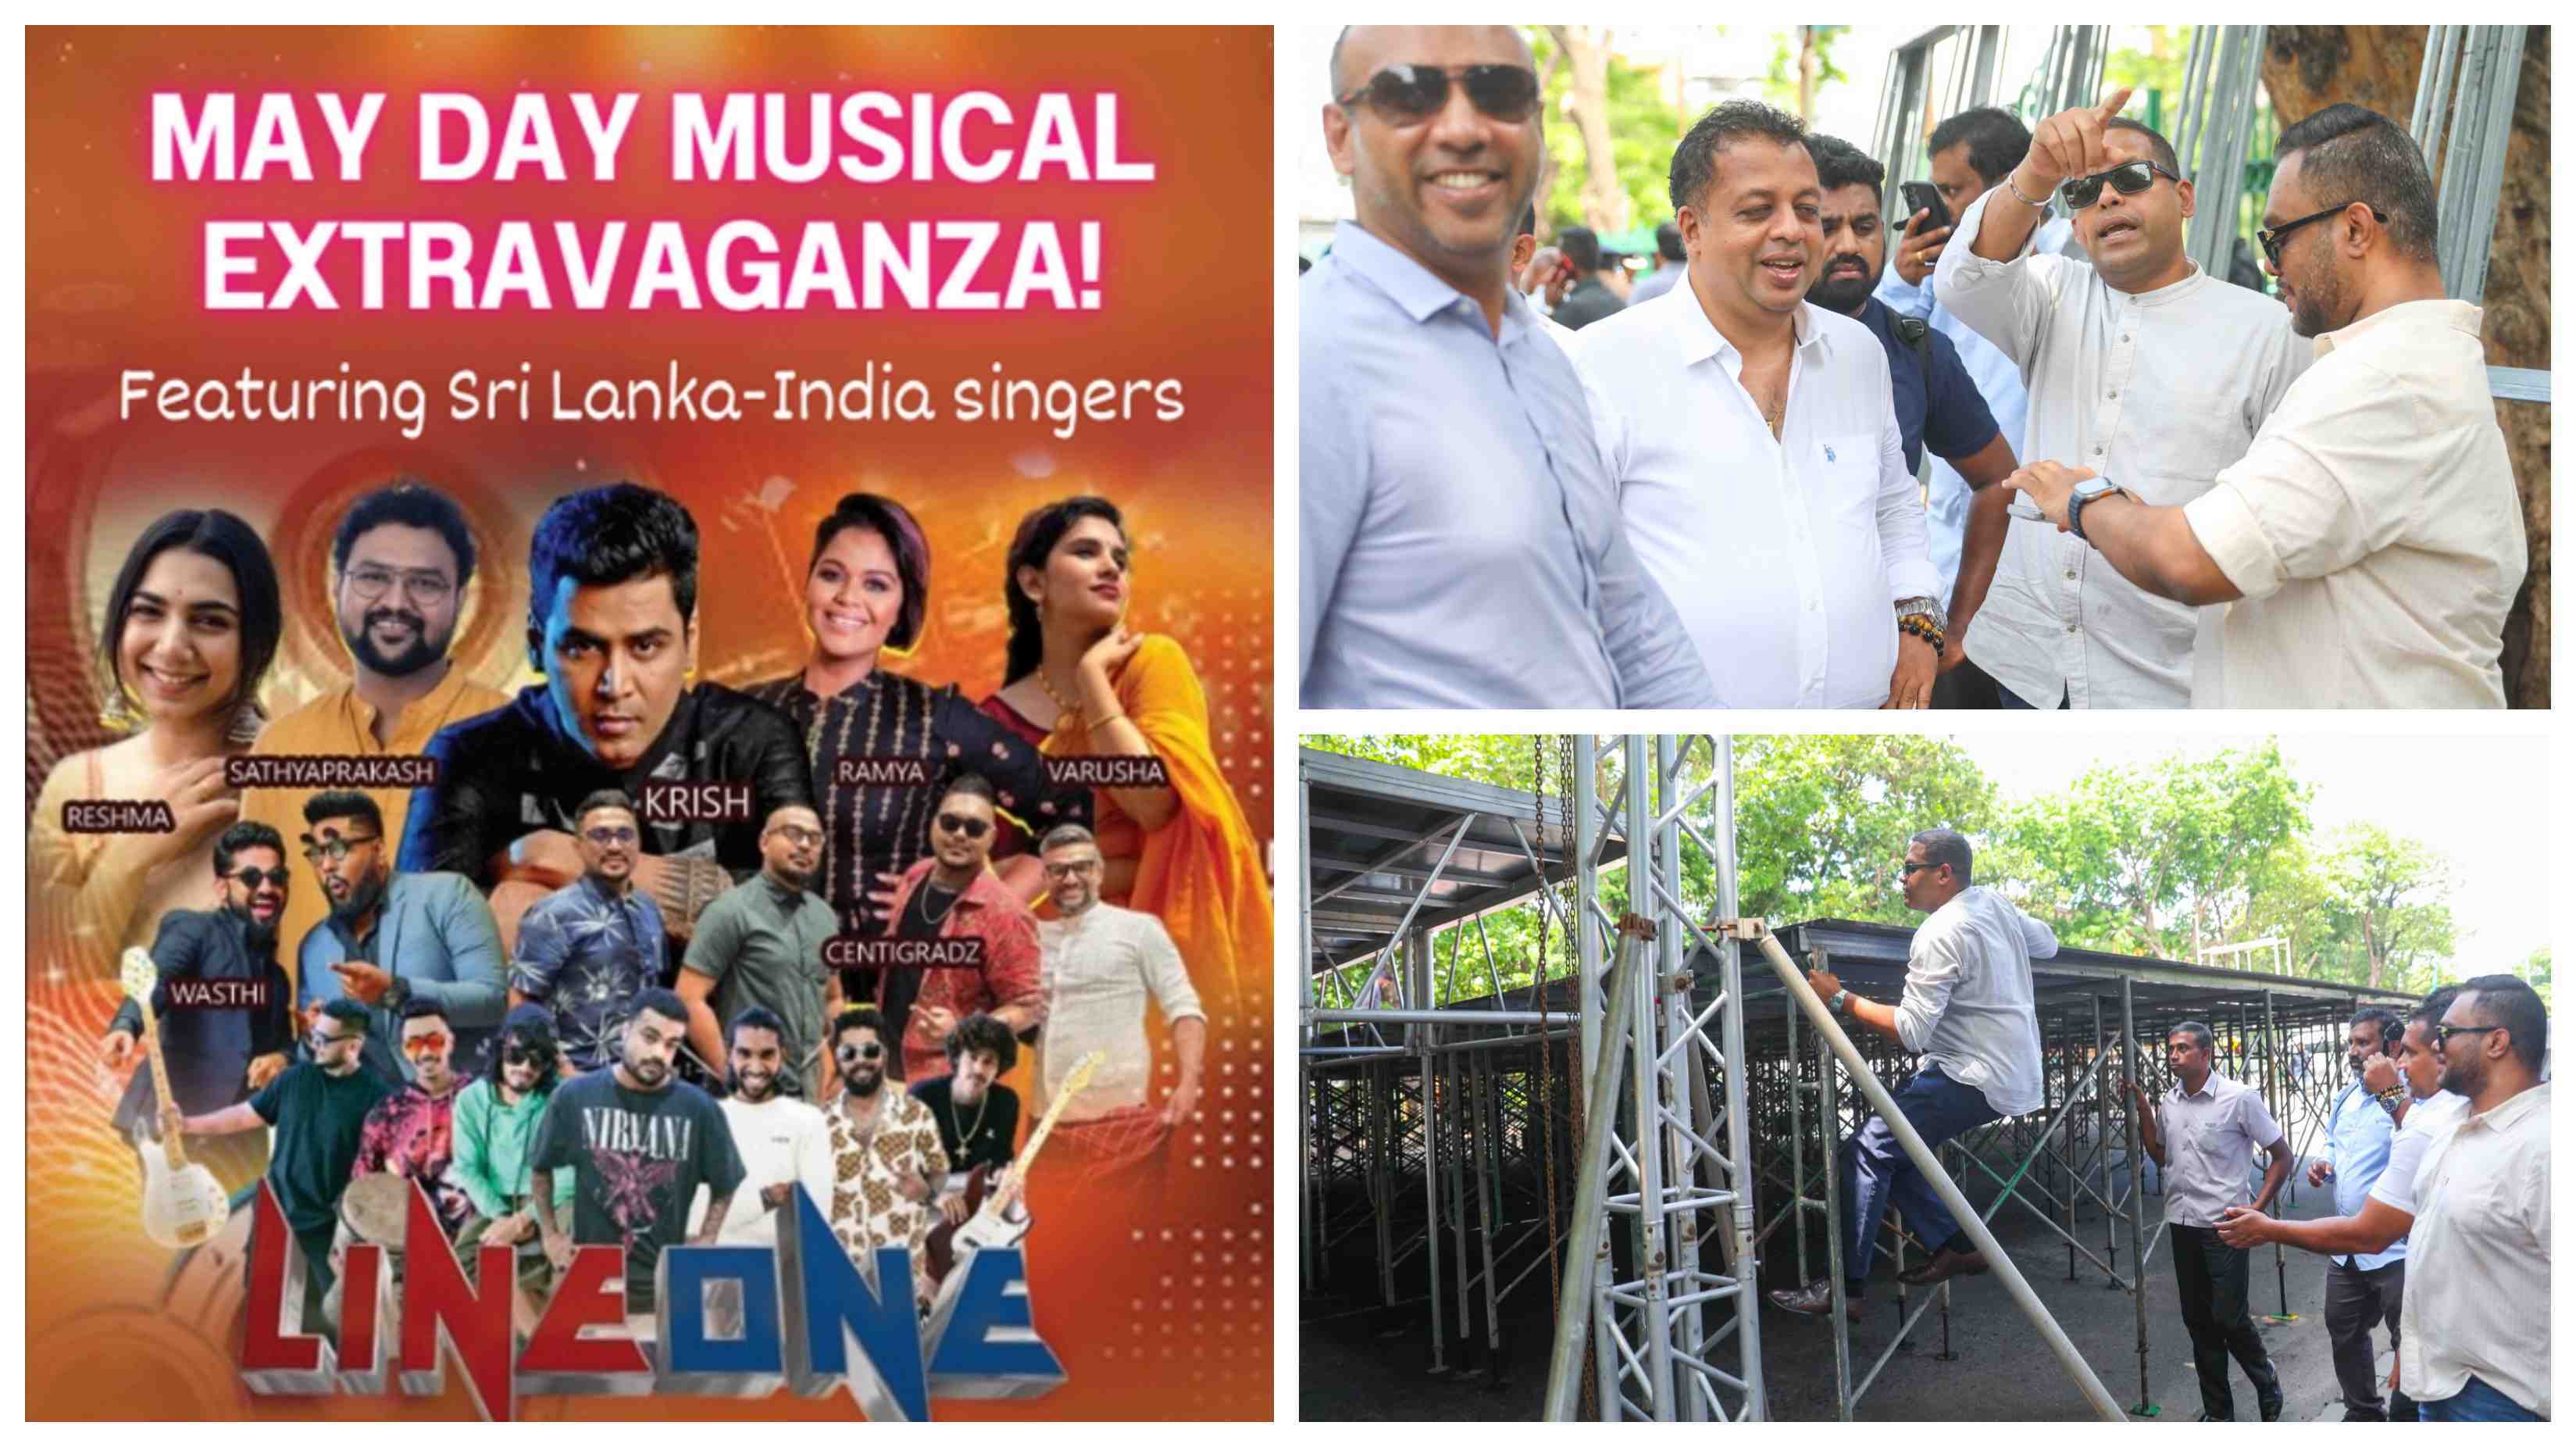 Massive “May Day Musical Extravaganza” after UNP May Day rally